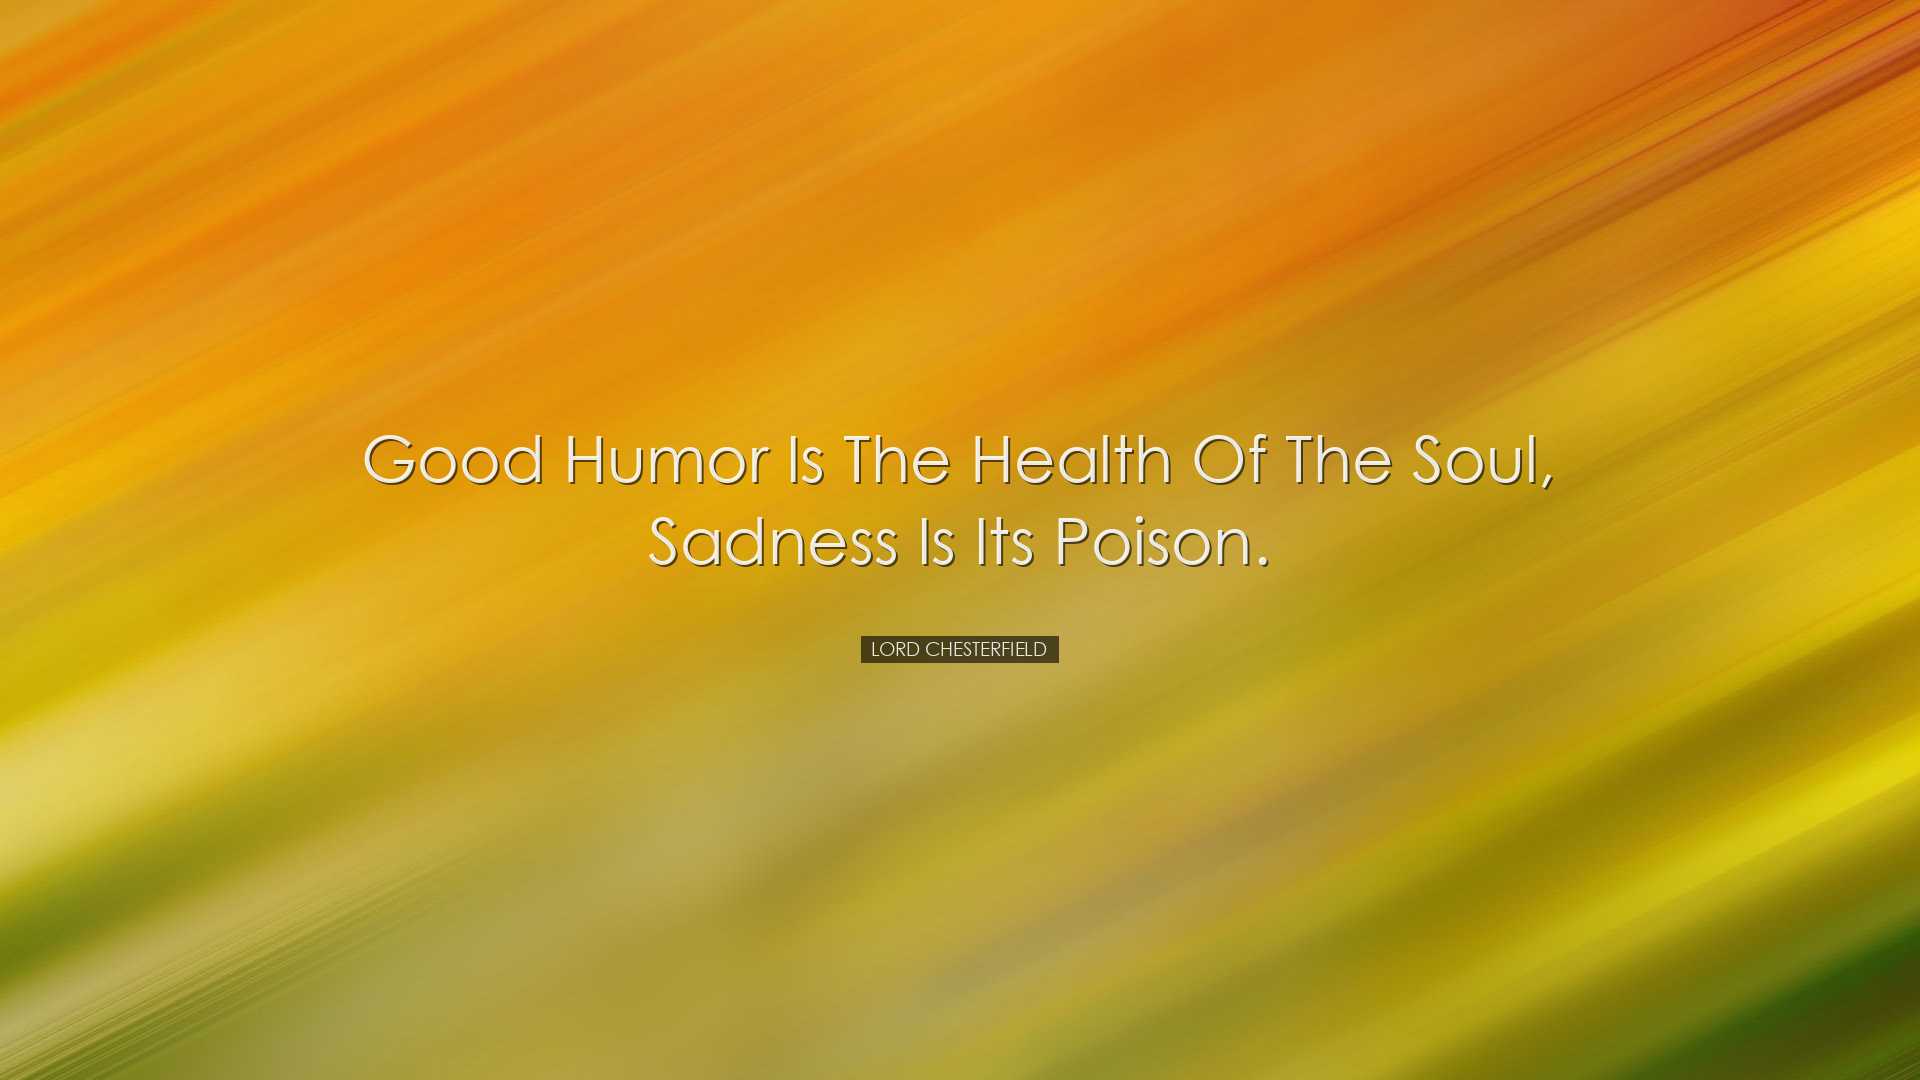 Good humor is the health of the soul, sadness is its poison. - Lor